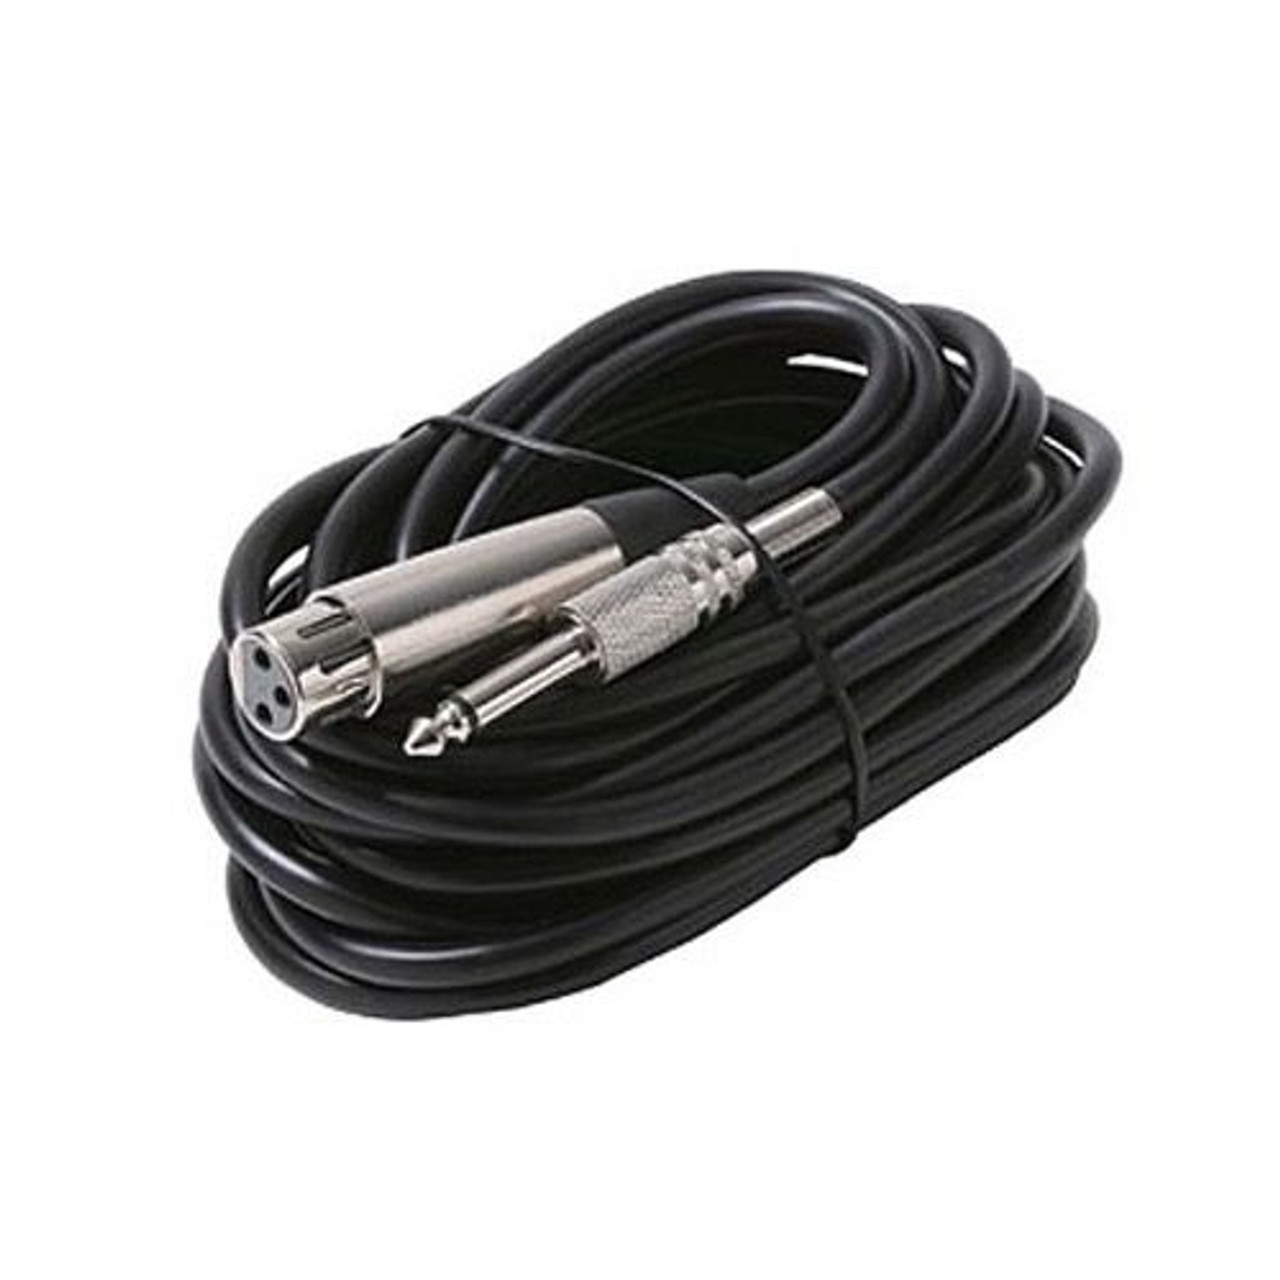 Steren 255-290 20' FT Microphone Cable 1/4 Jack to XLR with